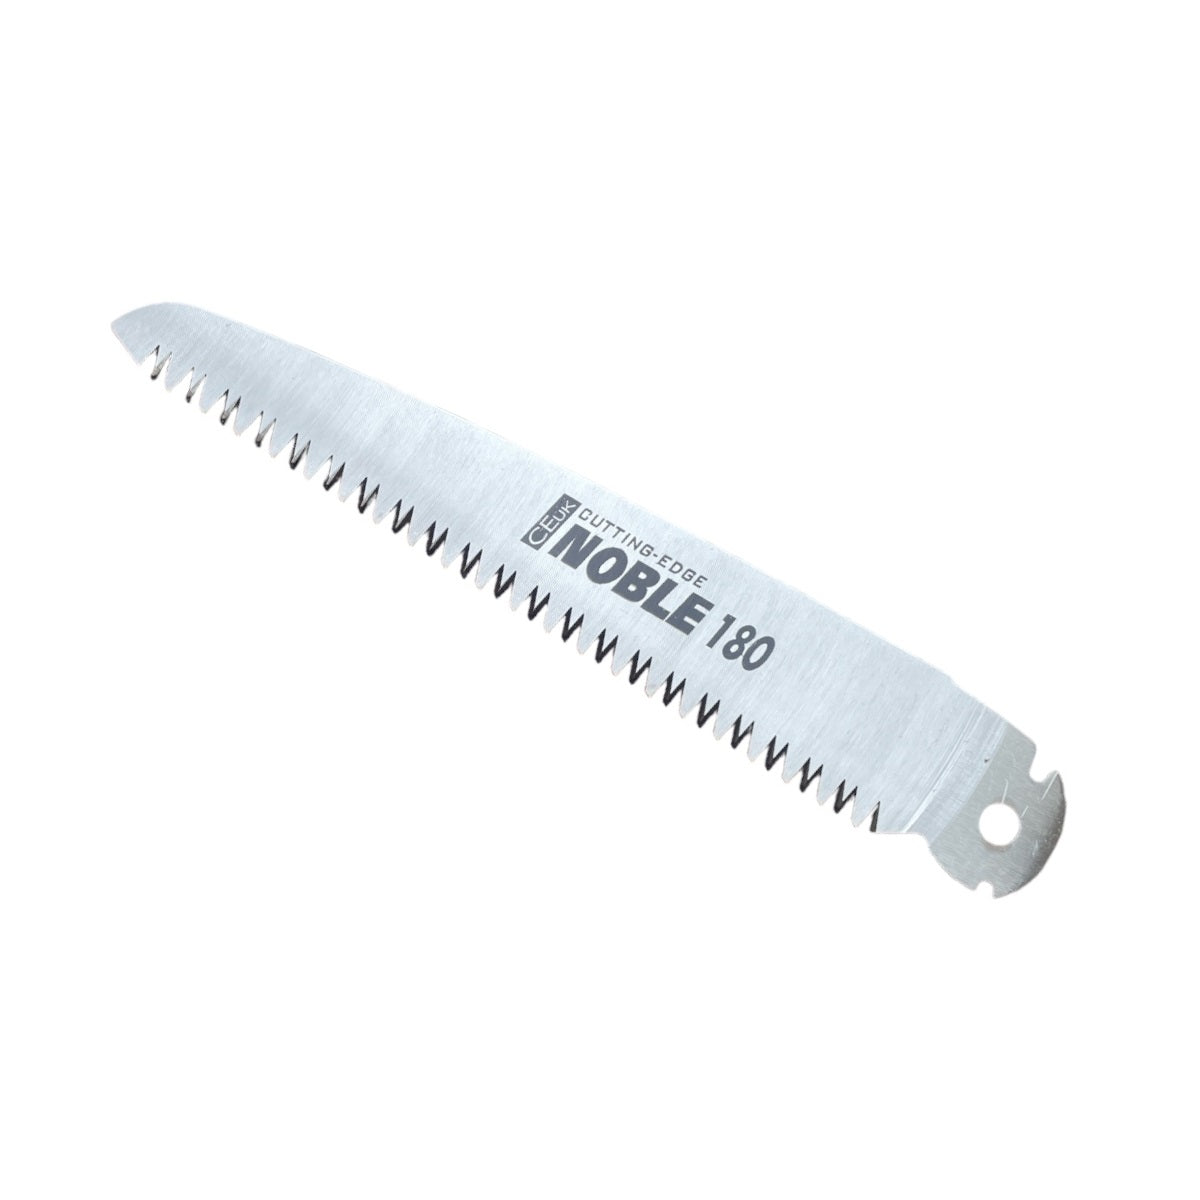 CE-UK NF-180-1 Noble 180 Blade